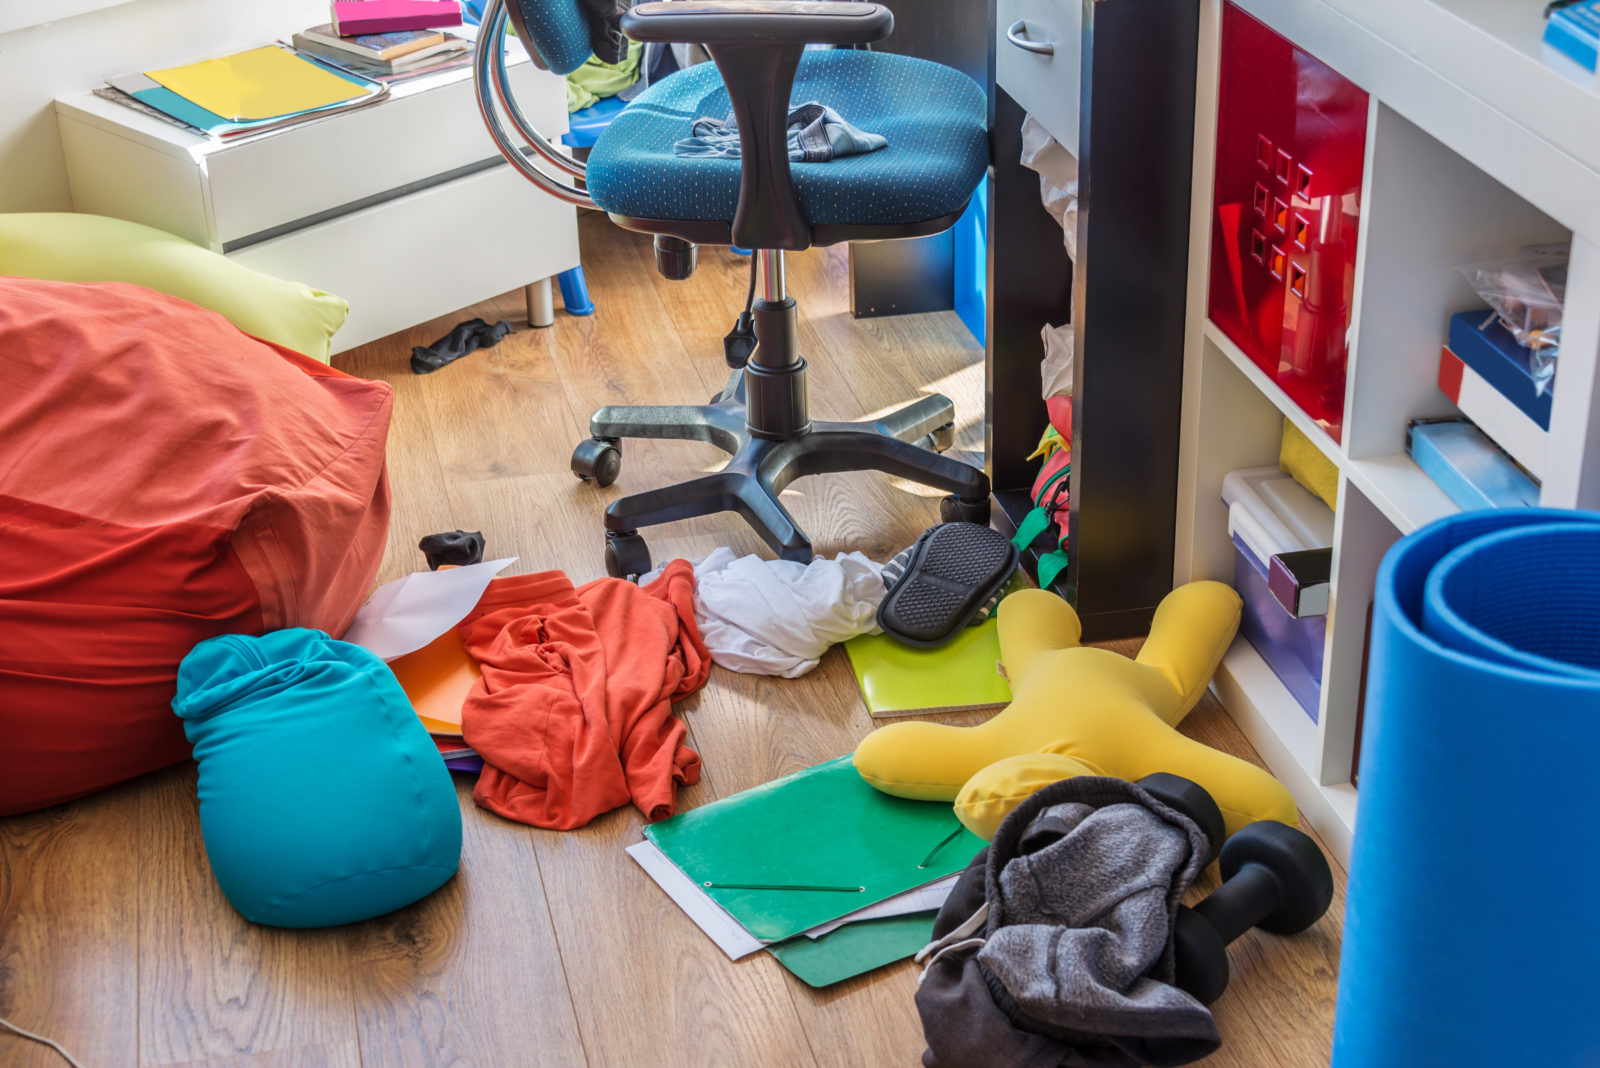 A Messy Kids Room / Messy Kids Room Images Search Images On Everypixel ...